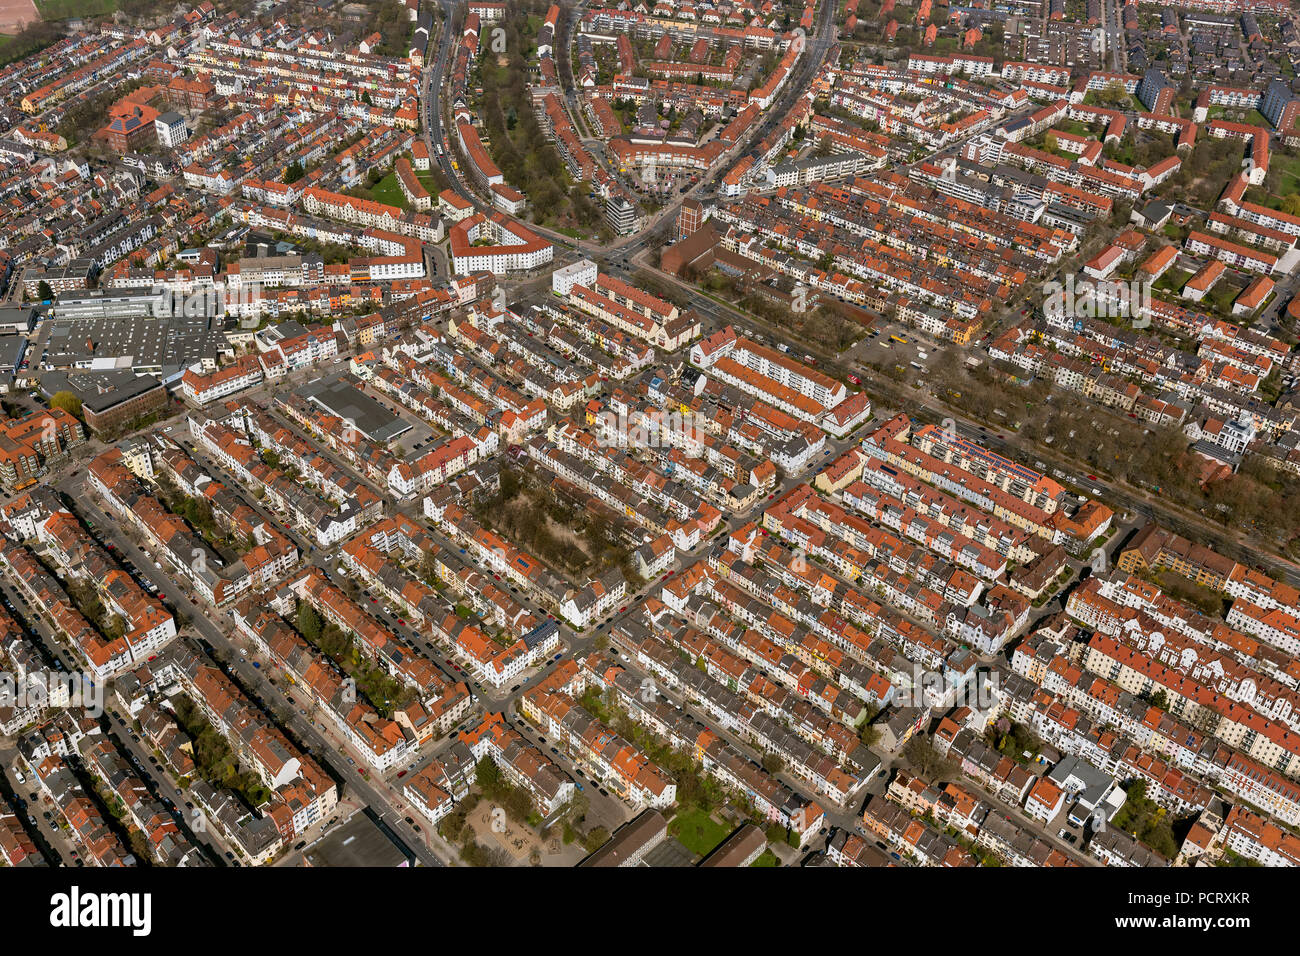 Row of houses in the district Findorff, rented flats, flats, red tile roofs, penthouses, aerial view, aerial photographs of Bremen Stock Photo